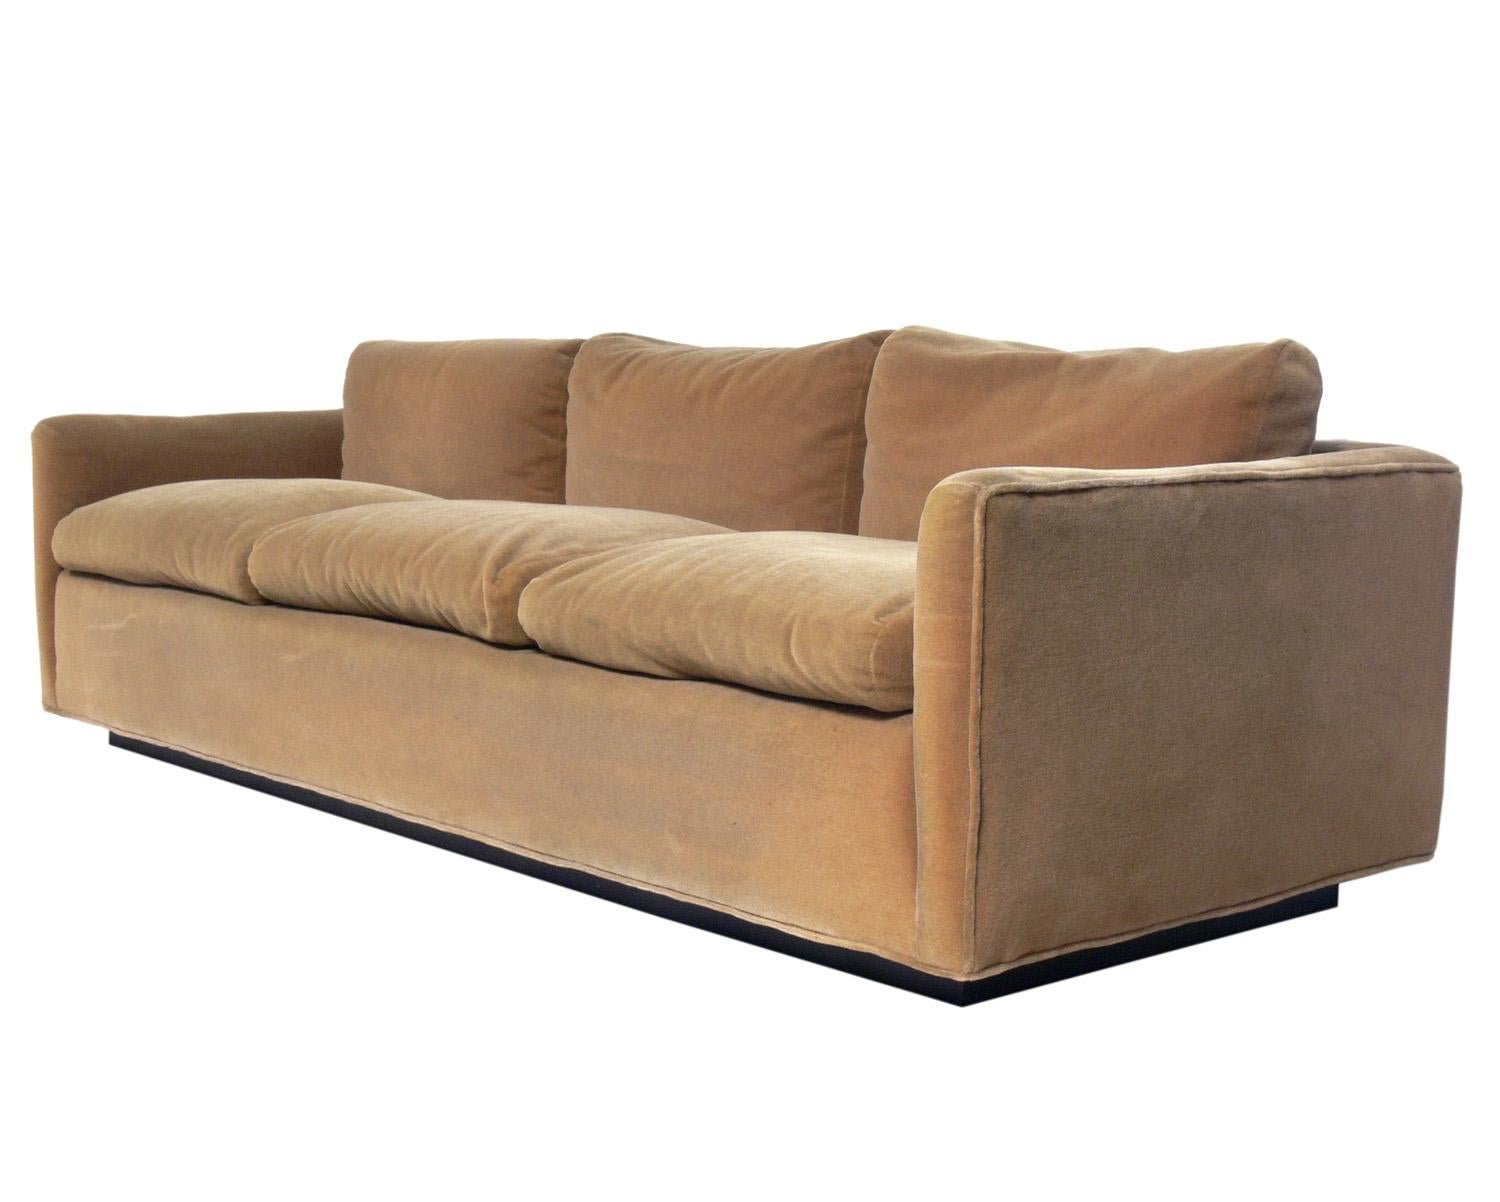 Clean lined sofa, designed by Ward Bennett for Lehigh Leopold, American, circa 1960s. Signed with Lehigh Leopold label on decking. This sofa currently retains it's original tan mohair upholstery. It exhibits some wear and should only be used if you